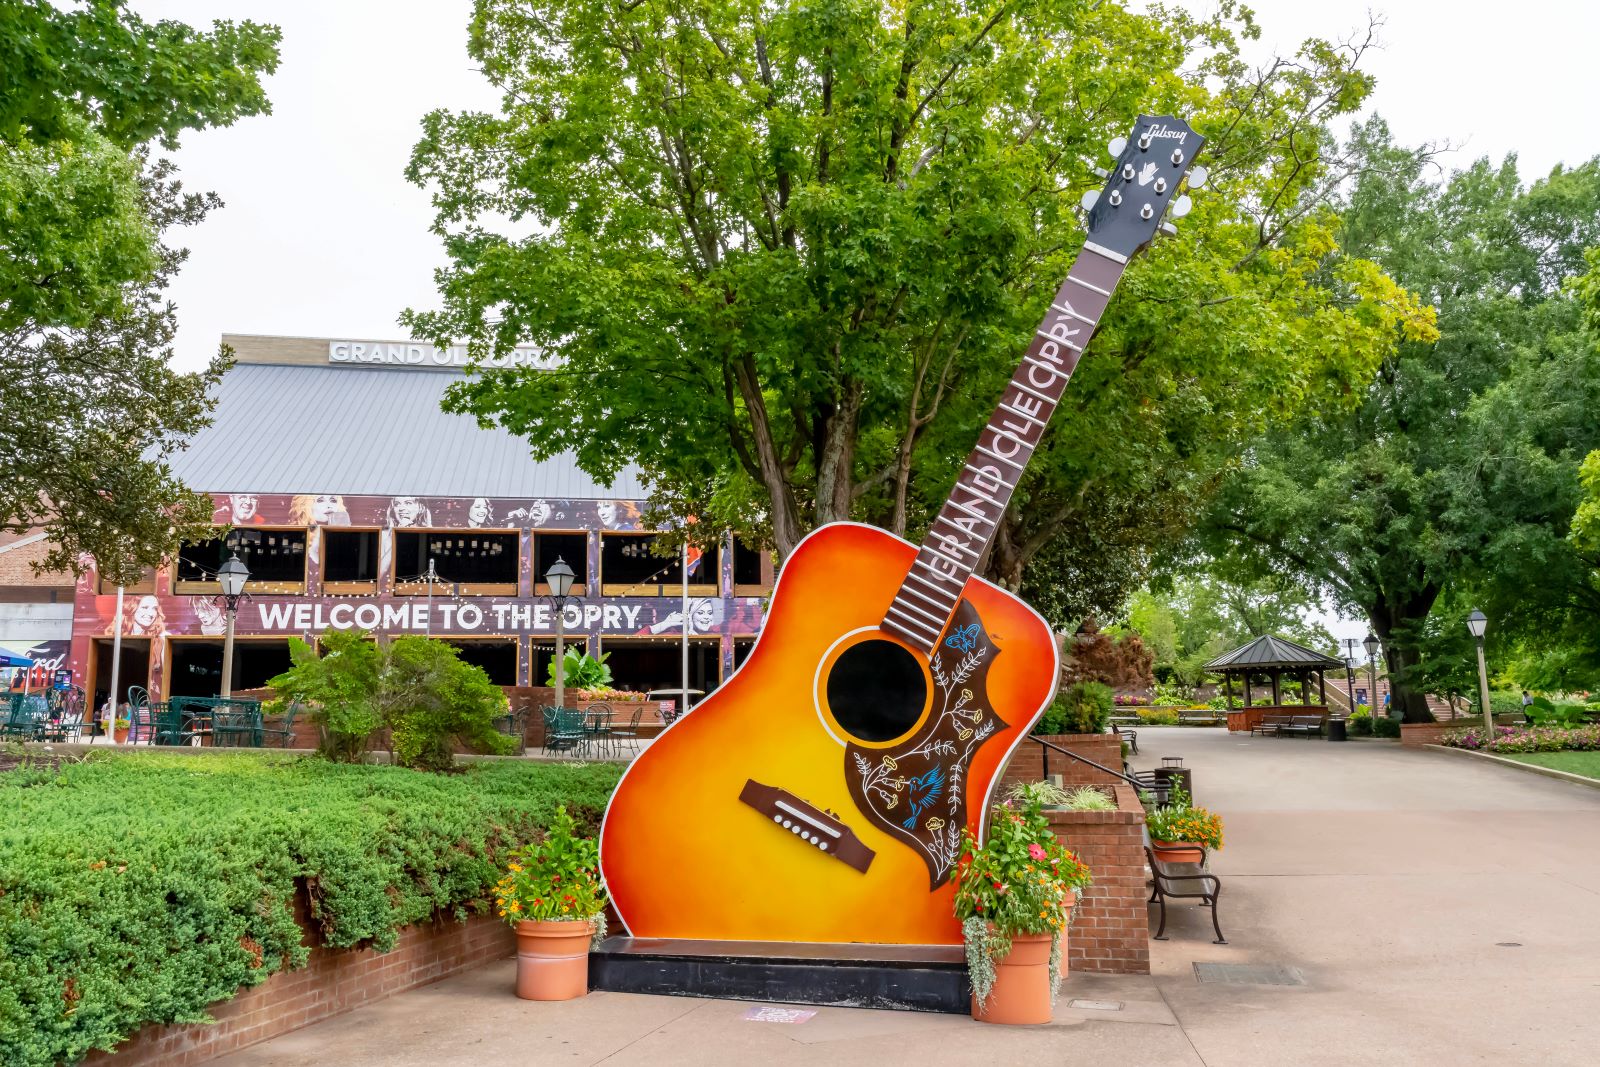 <p class="wp-caption-text">Image Credit: Shutterstock / Grindstone Media Group</p>  <p>Experience the heart and soul of country music with a visit to the Grand Ole Opry. This iconic venue has hosted legendary performers for nearly a century, and catching a live show here is a must-do for music lovers of all ages.</p>